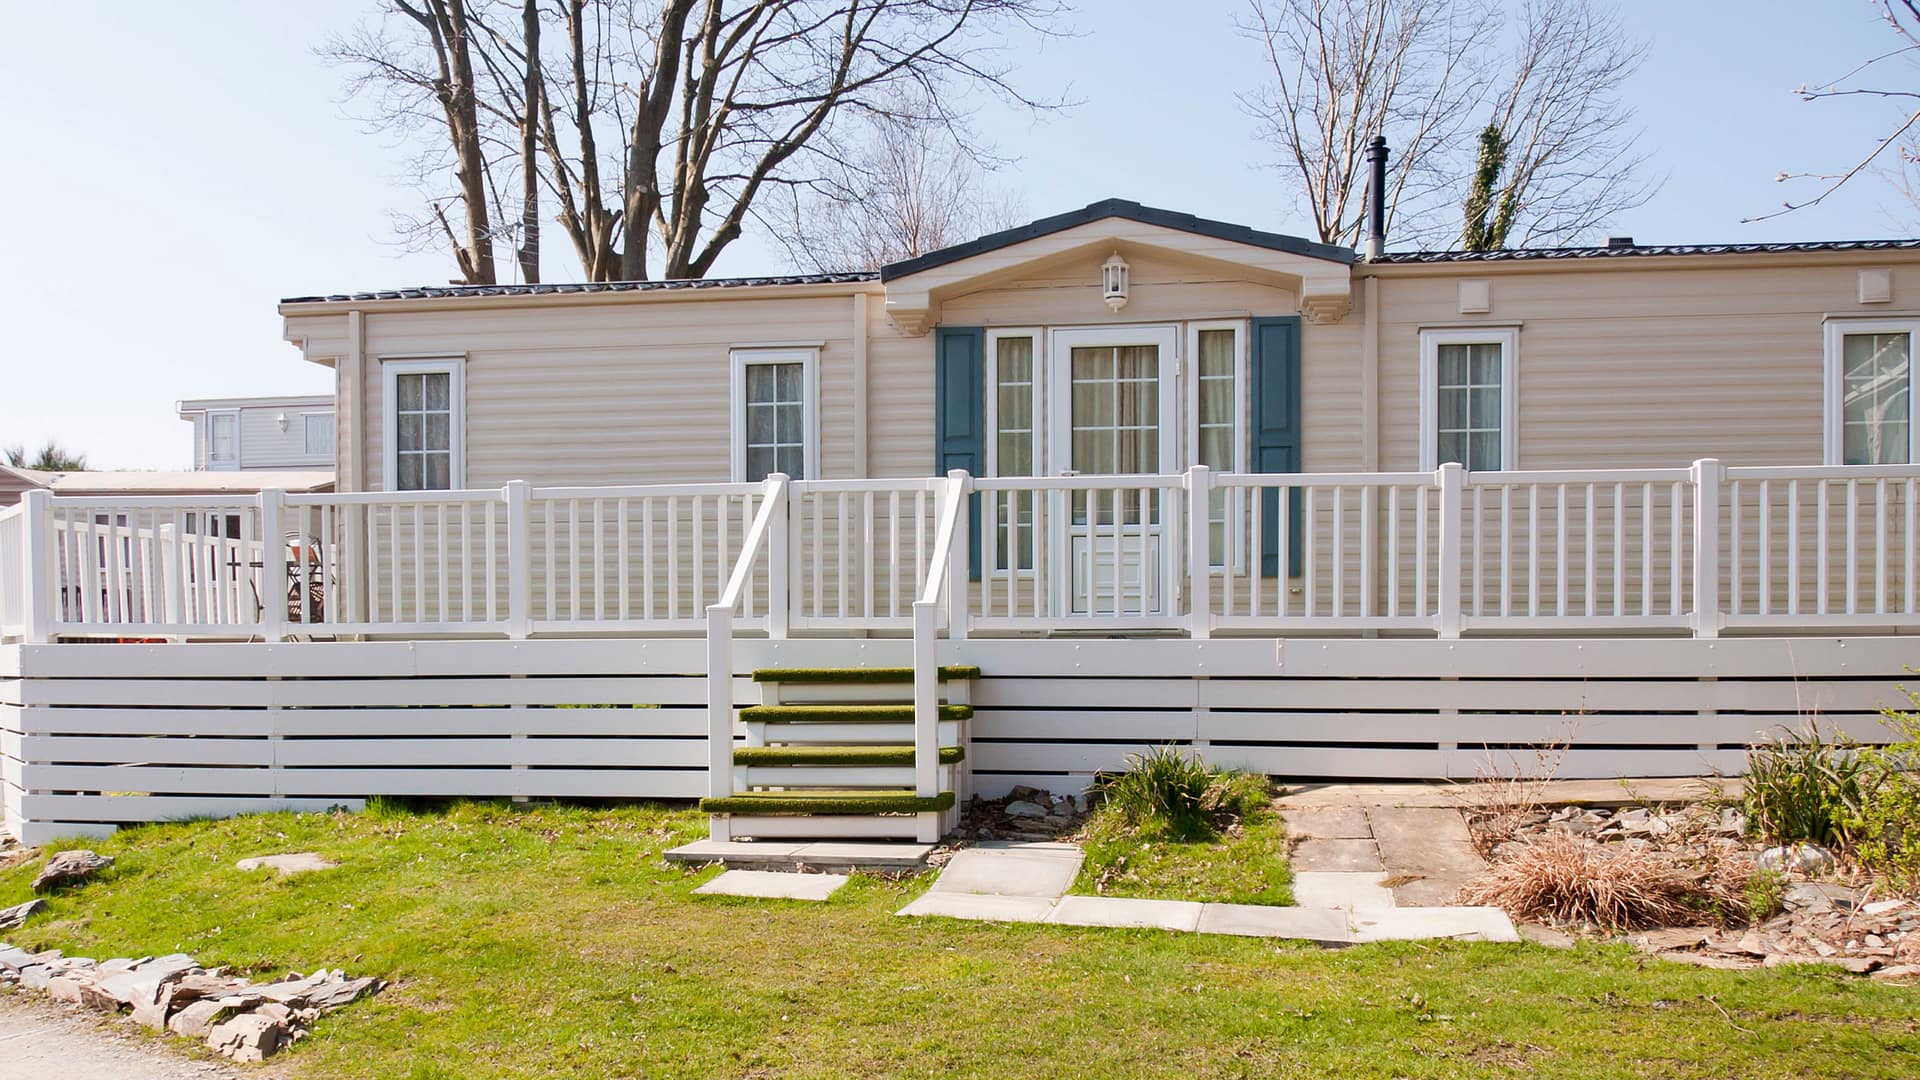 Exterior view of mobile home with front porch.